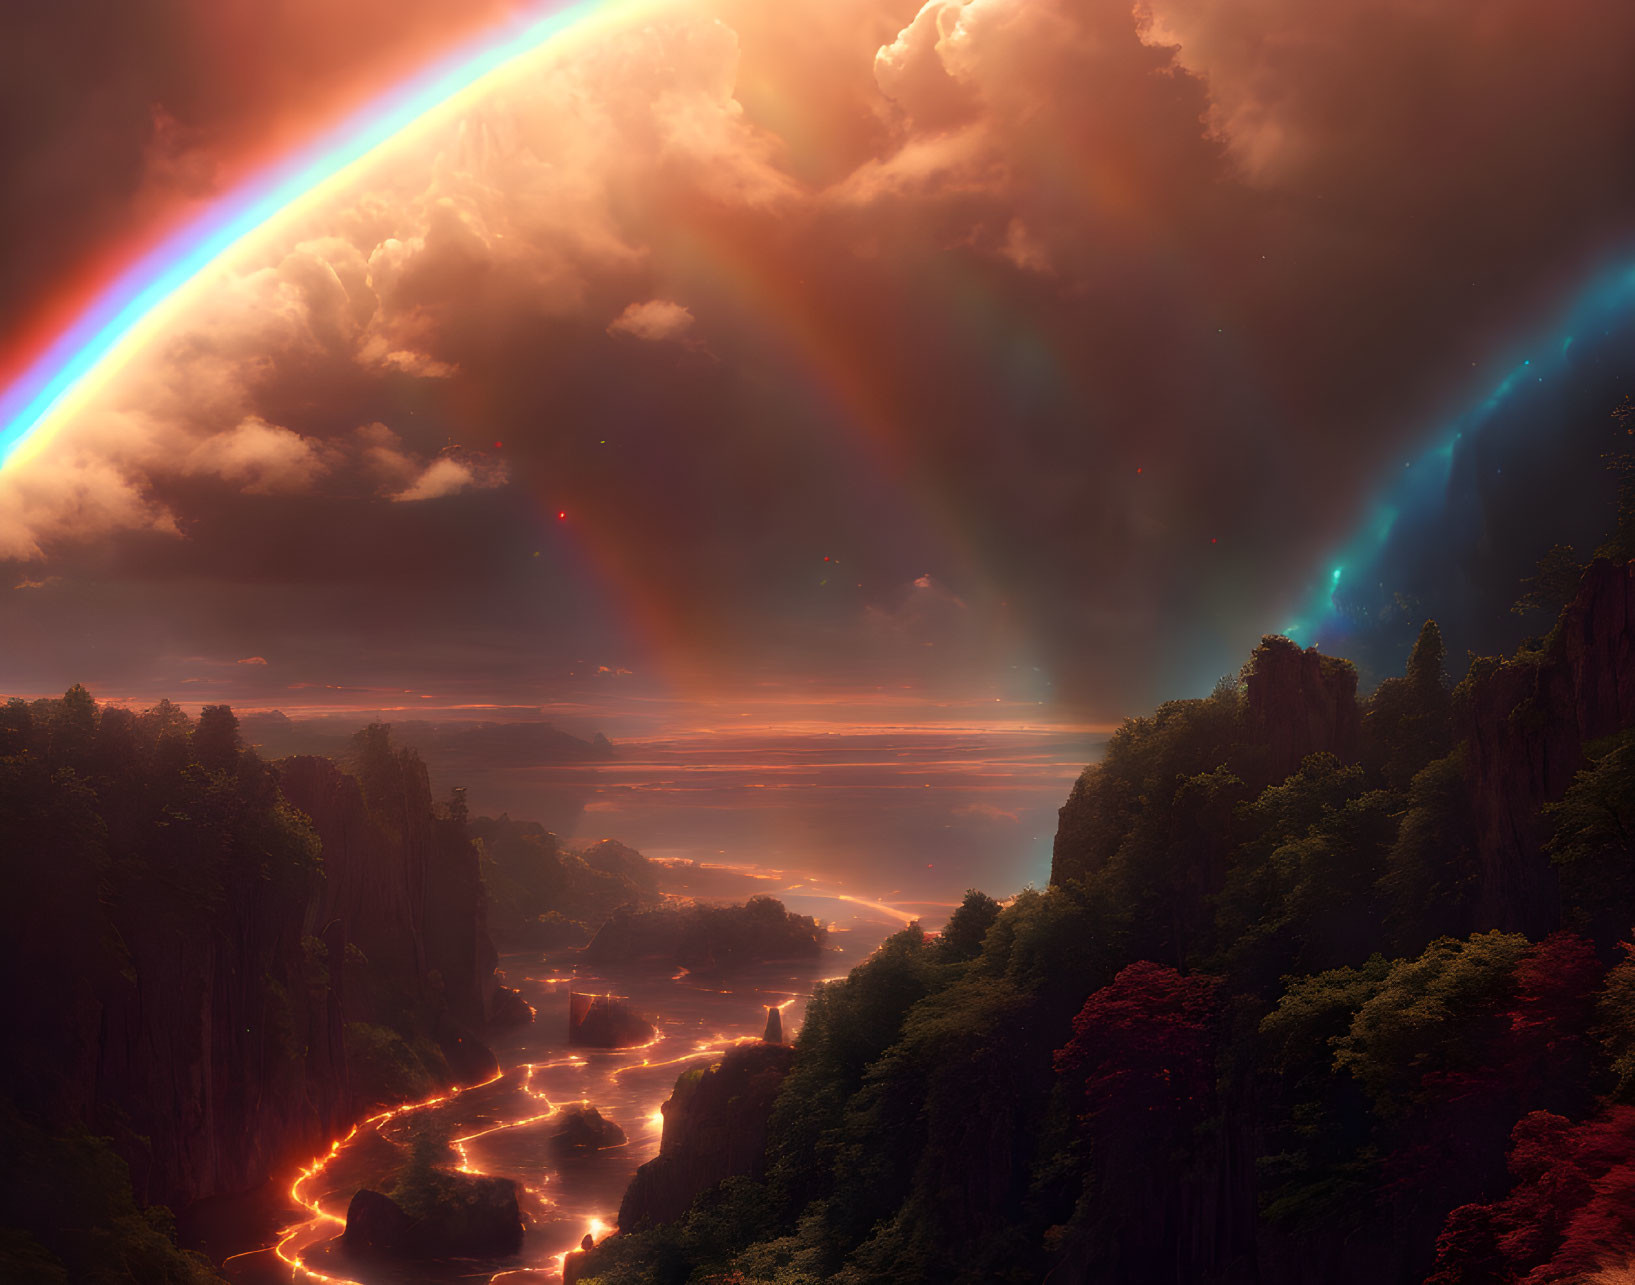 Vivid rainbow over fiery river in surreal landscape